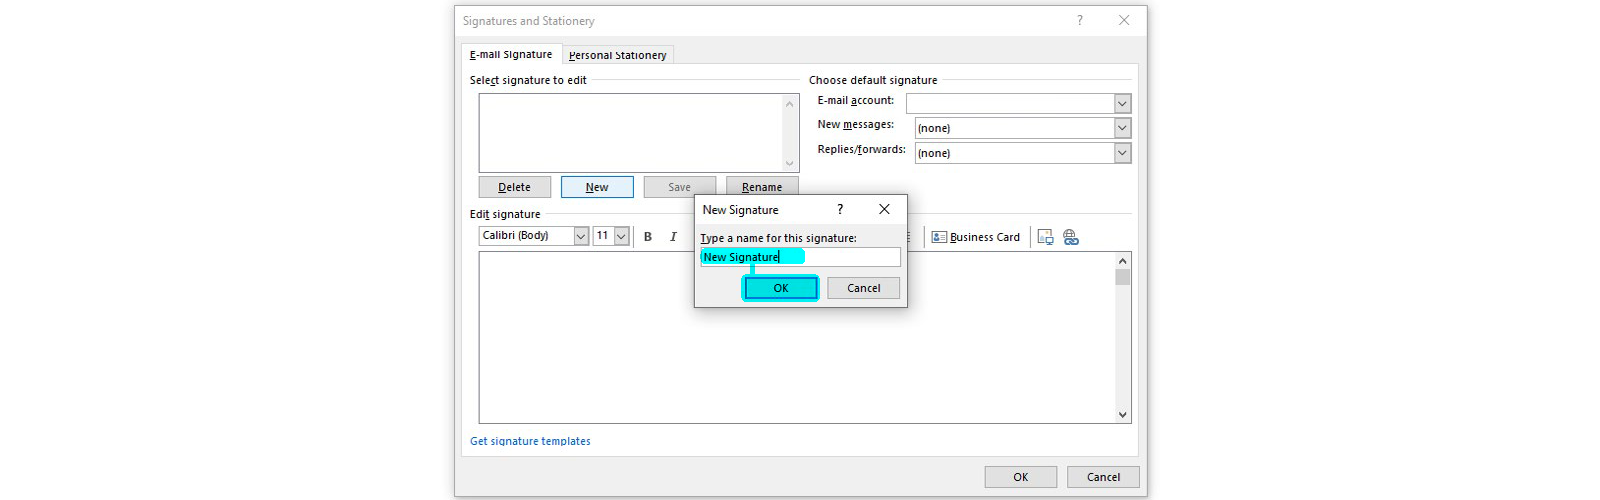 Image demonstrating how to add a name for a new signature in Outlook